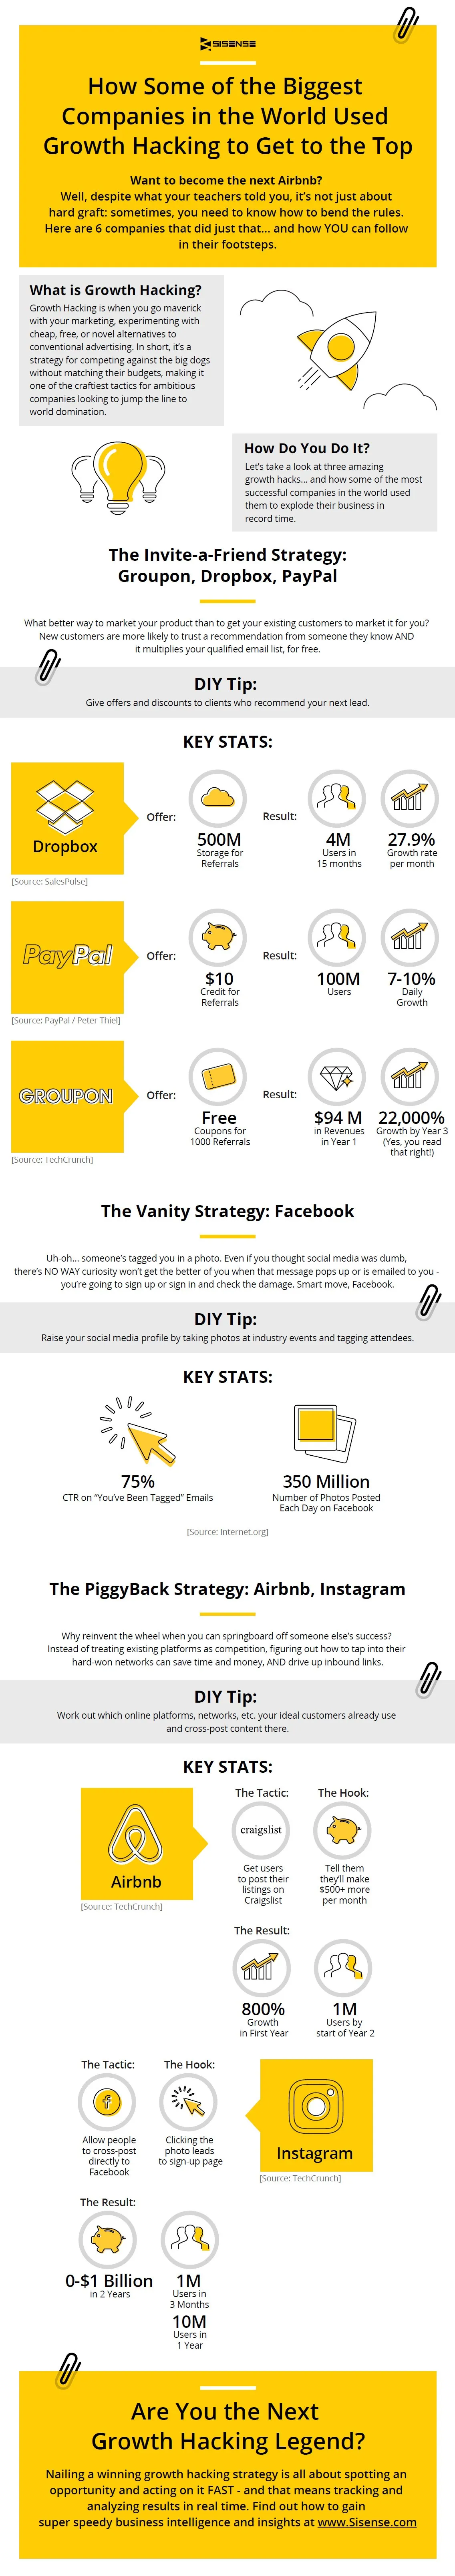 How Some of the Biggest Companies in the World Used Growth Hacking to Get to the Top - #infographic